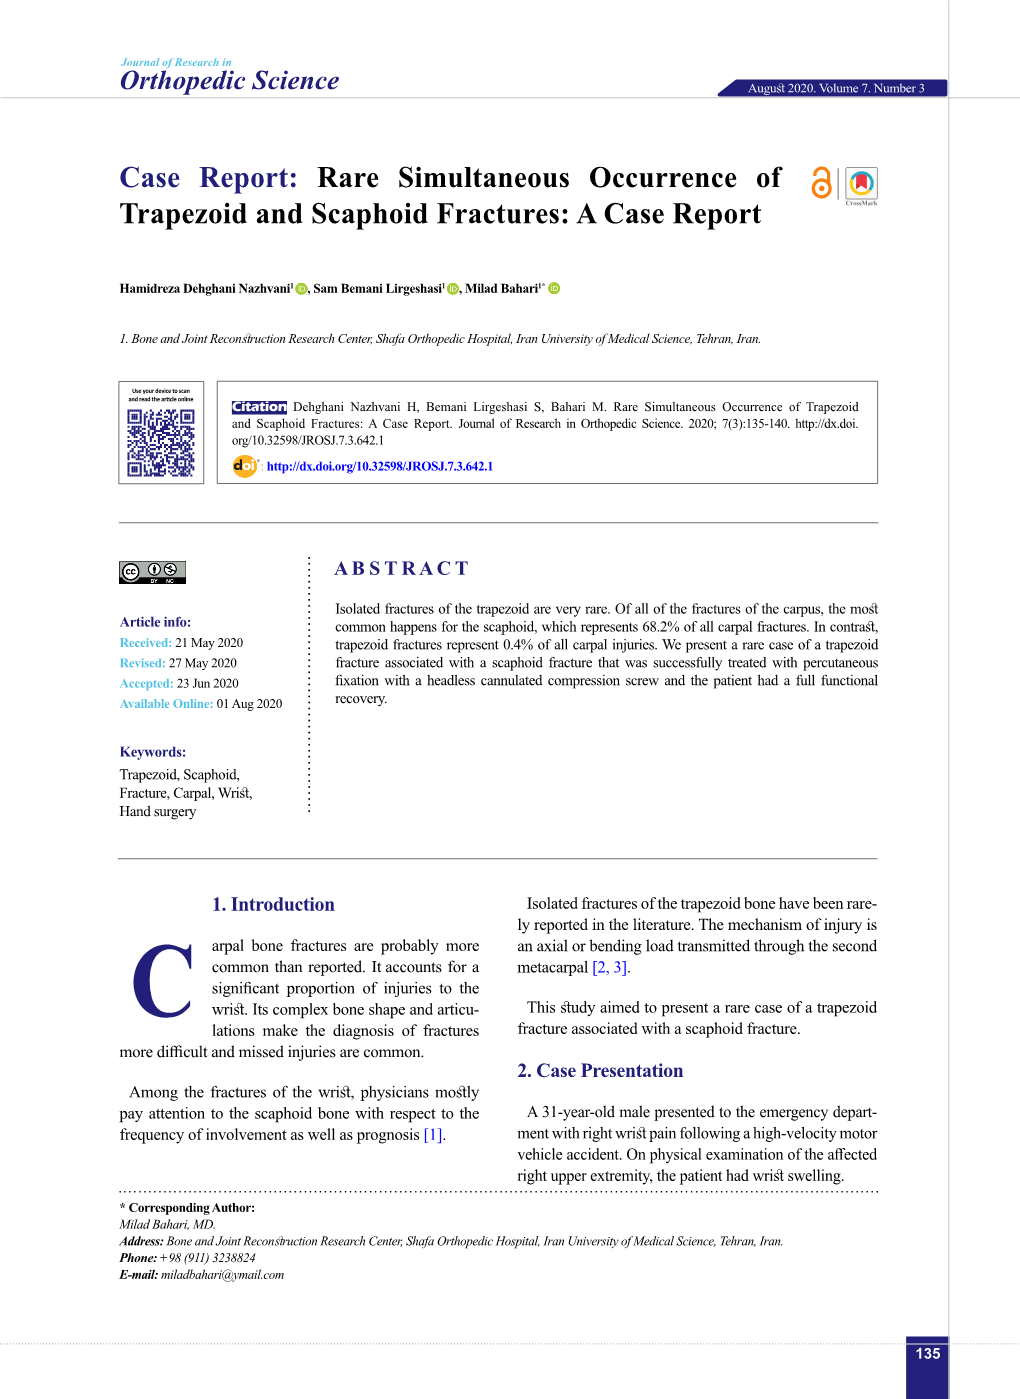 Rare Simultaneous Occurrence of Trapezoid and Scaphoid Fractures: a Case Report